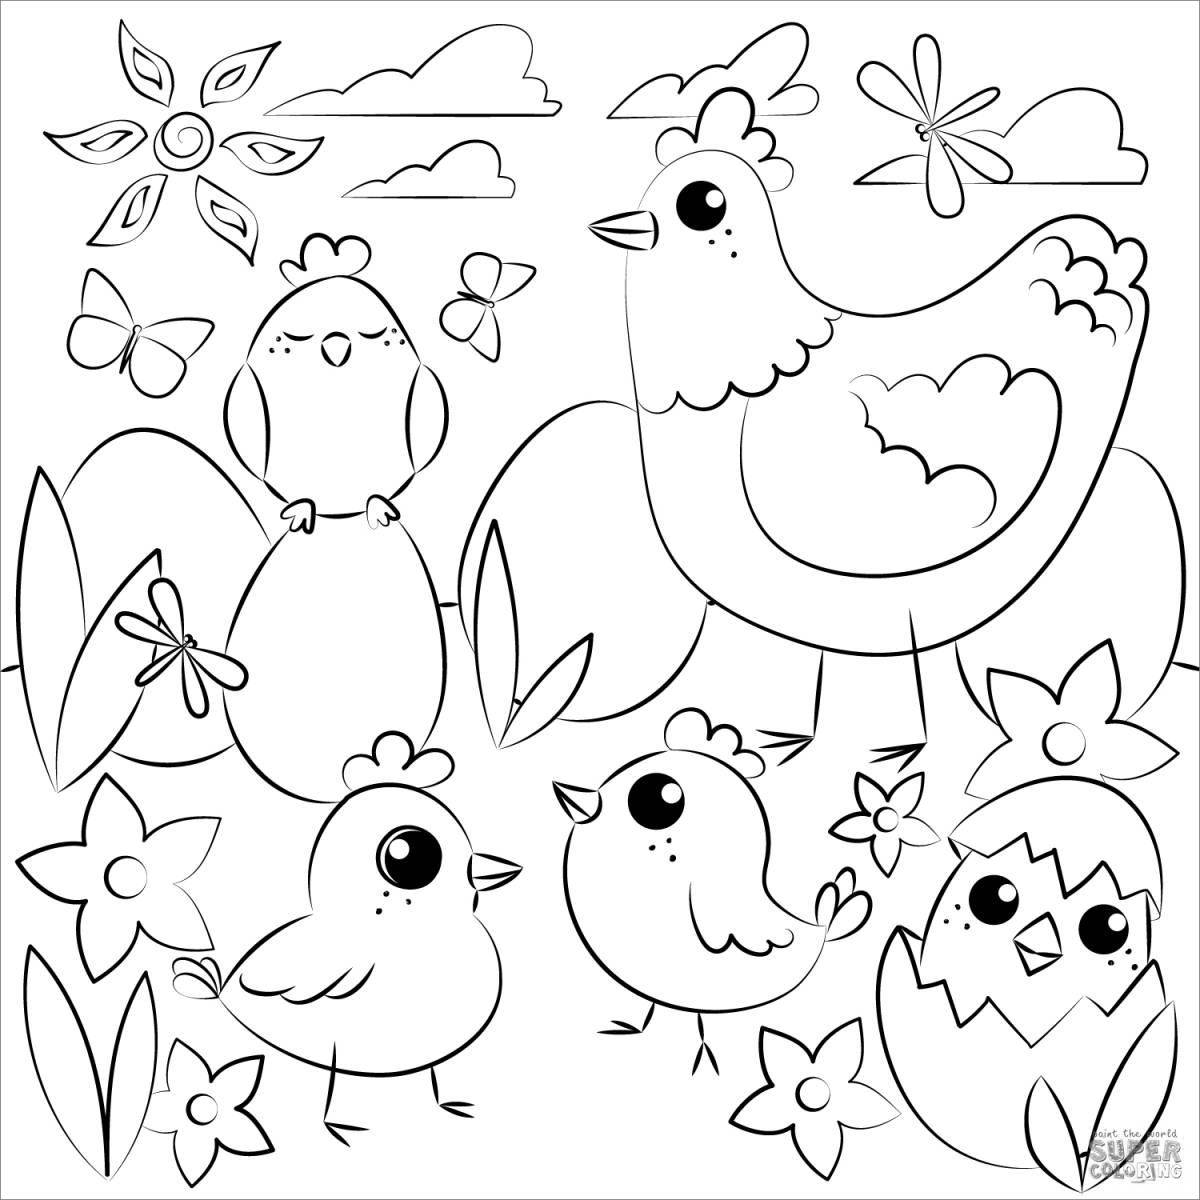 Colorful chickens coloring pages for kids